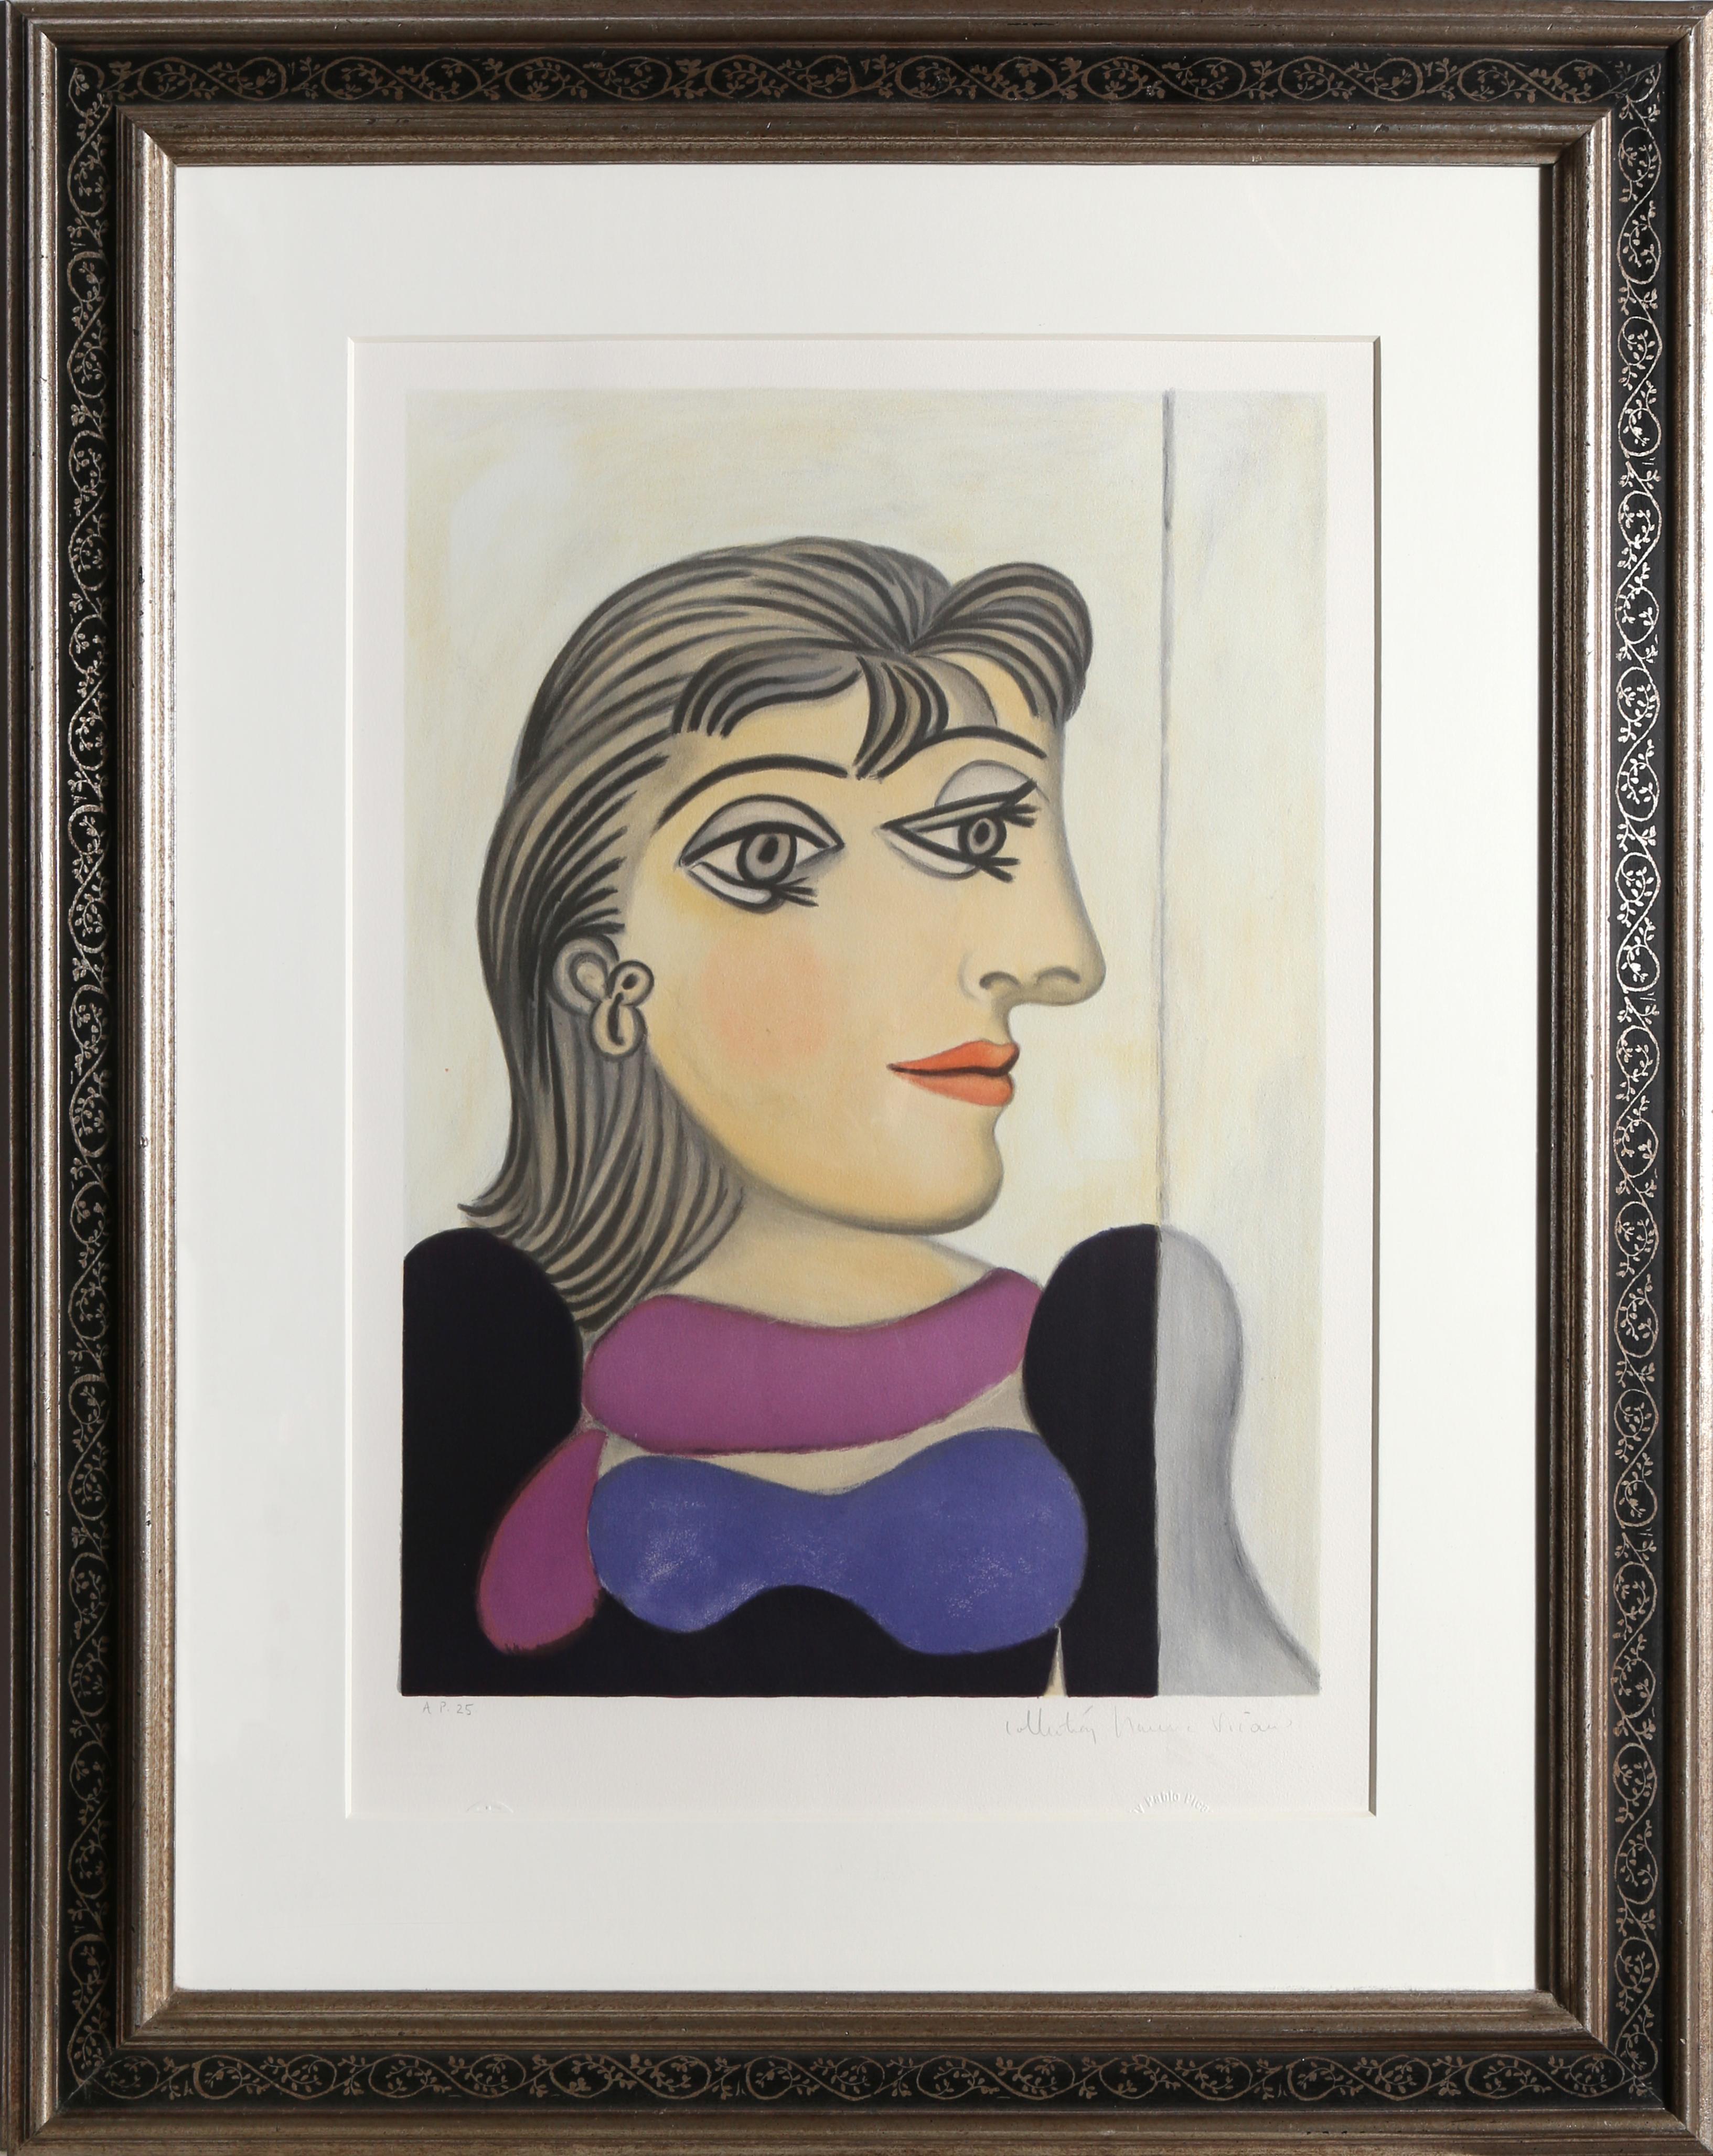 A lithograph from the Marina Picasso Estate Collection after the Pablo Picasso painting "Buste de Femme Au Foulard Mauve".  The original painting was completed in 1937. In the 1970's after Picasso's death, Marina Picasso, his granddaughter,